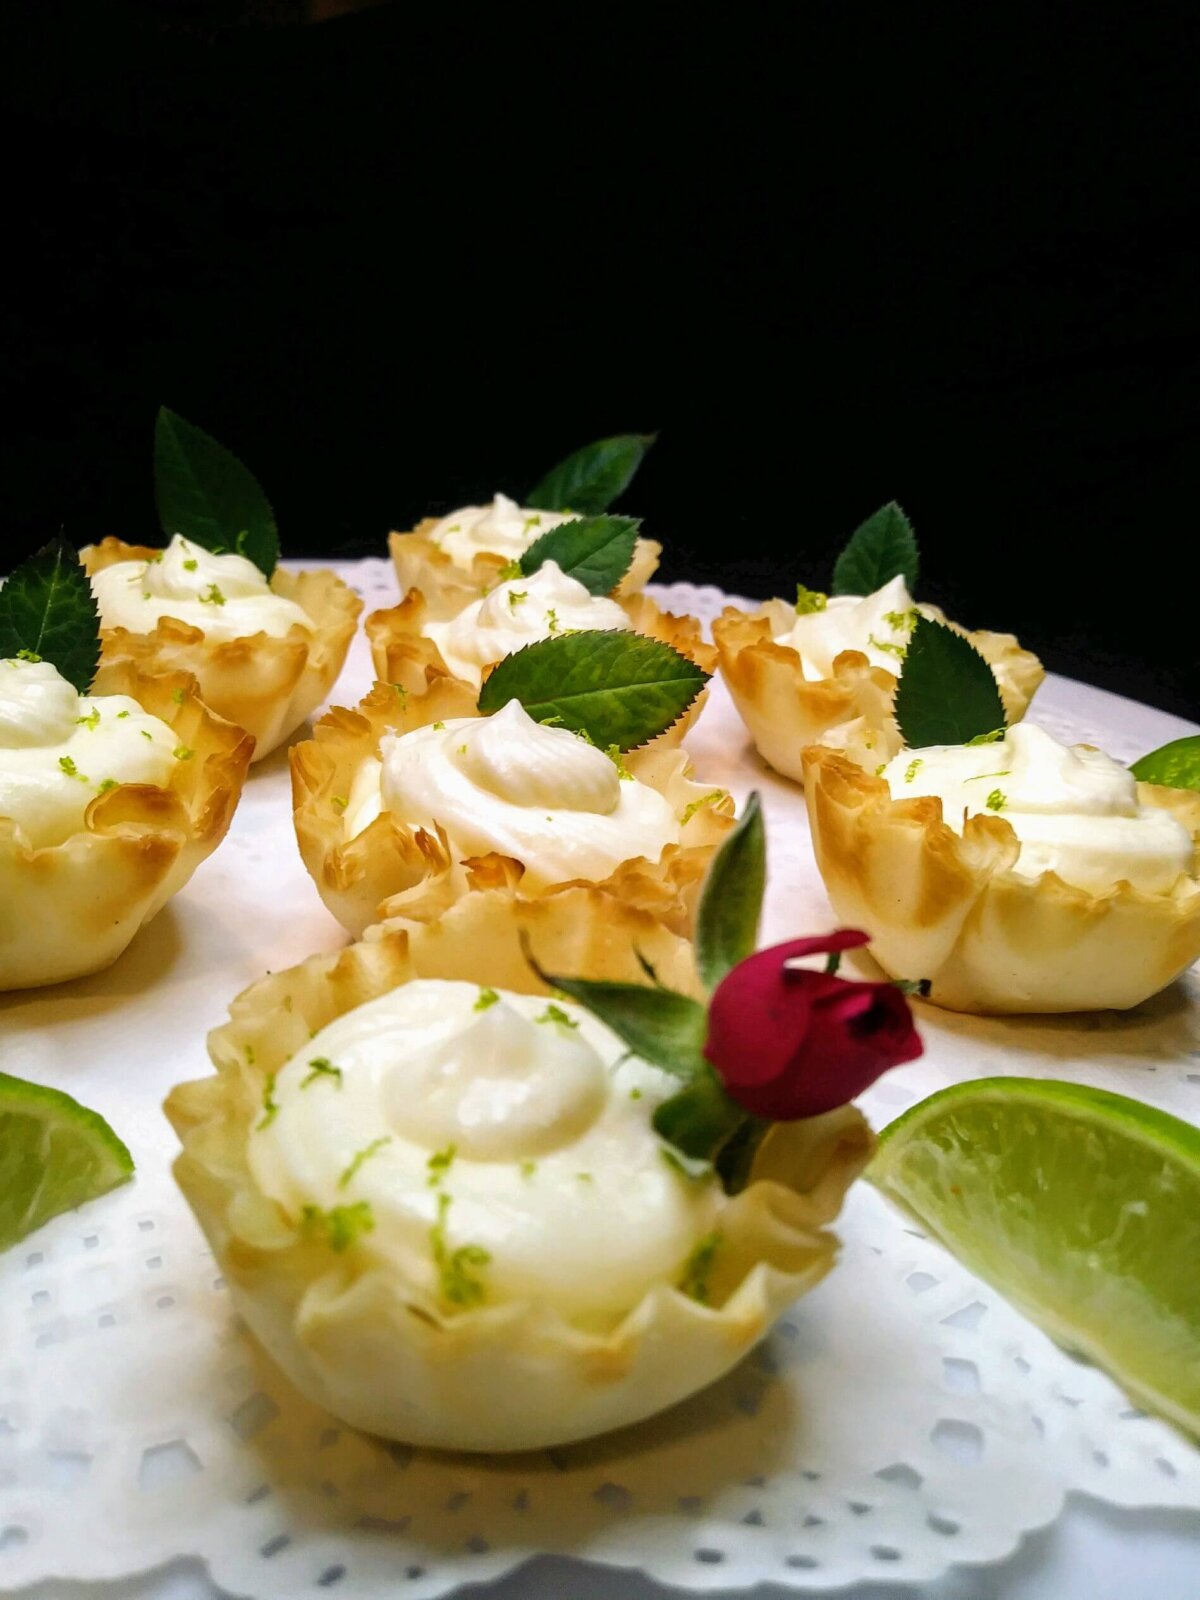 Key Lime Mousse Cups